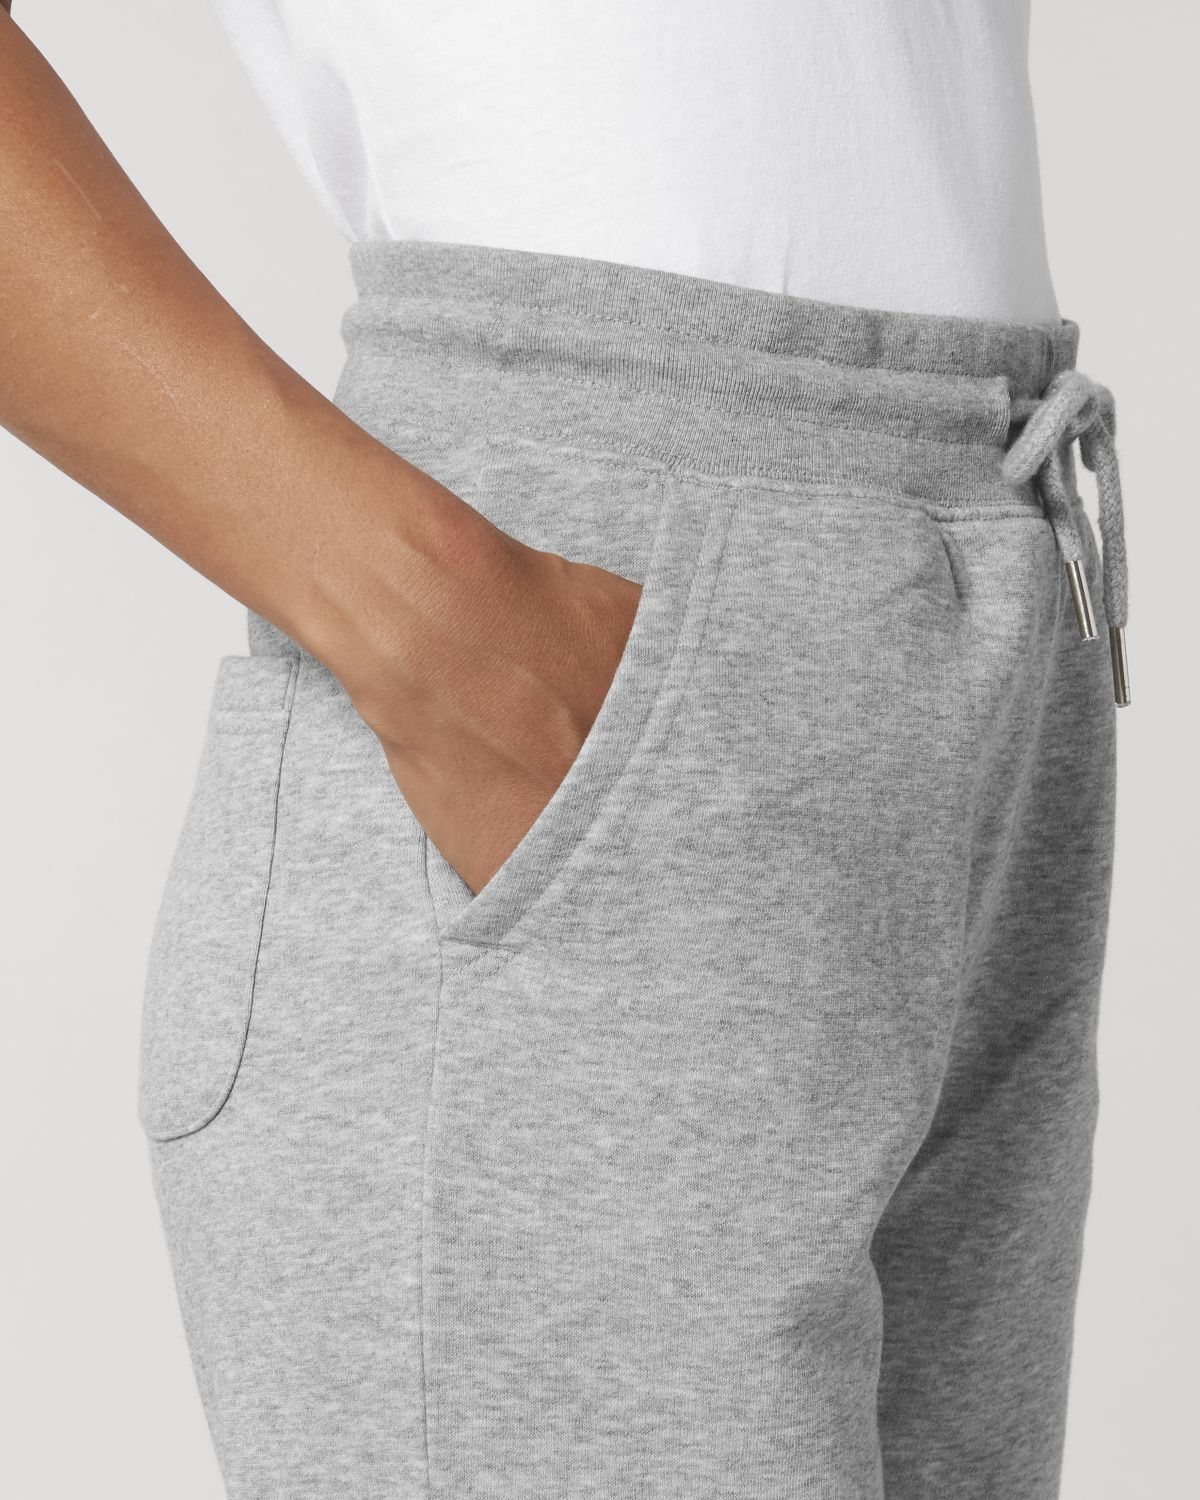 Stanley/Stella's - Mover Jogging Pants - Heather Grey